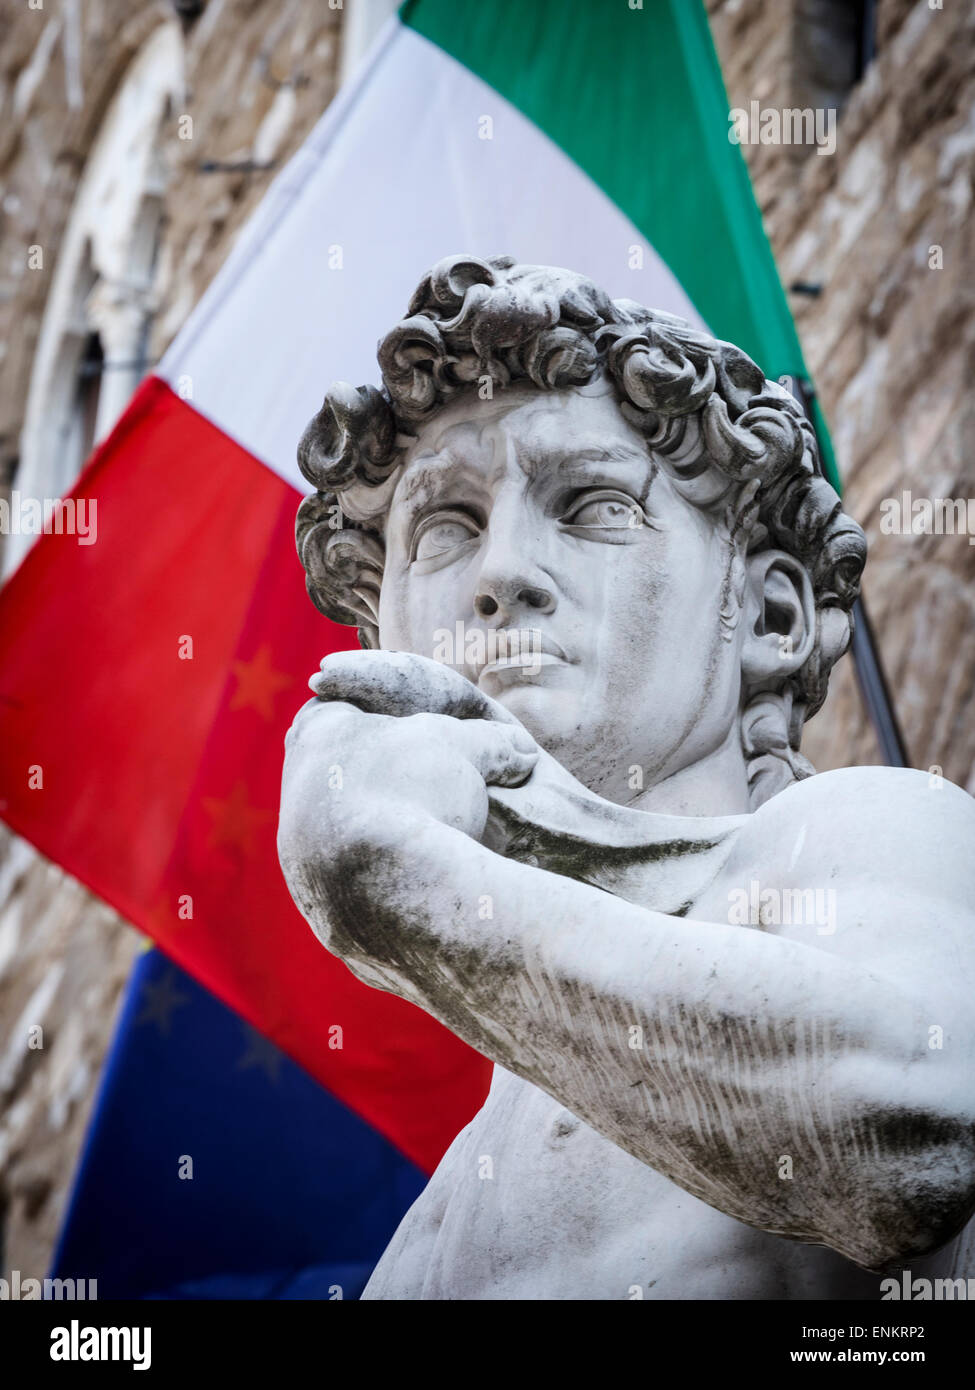 Michelangelo's David with the Italian flag in the background,Florence, Tuscany, Italy. Stock Photo